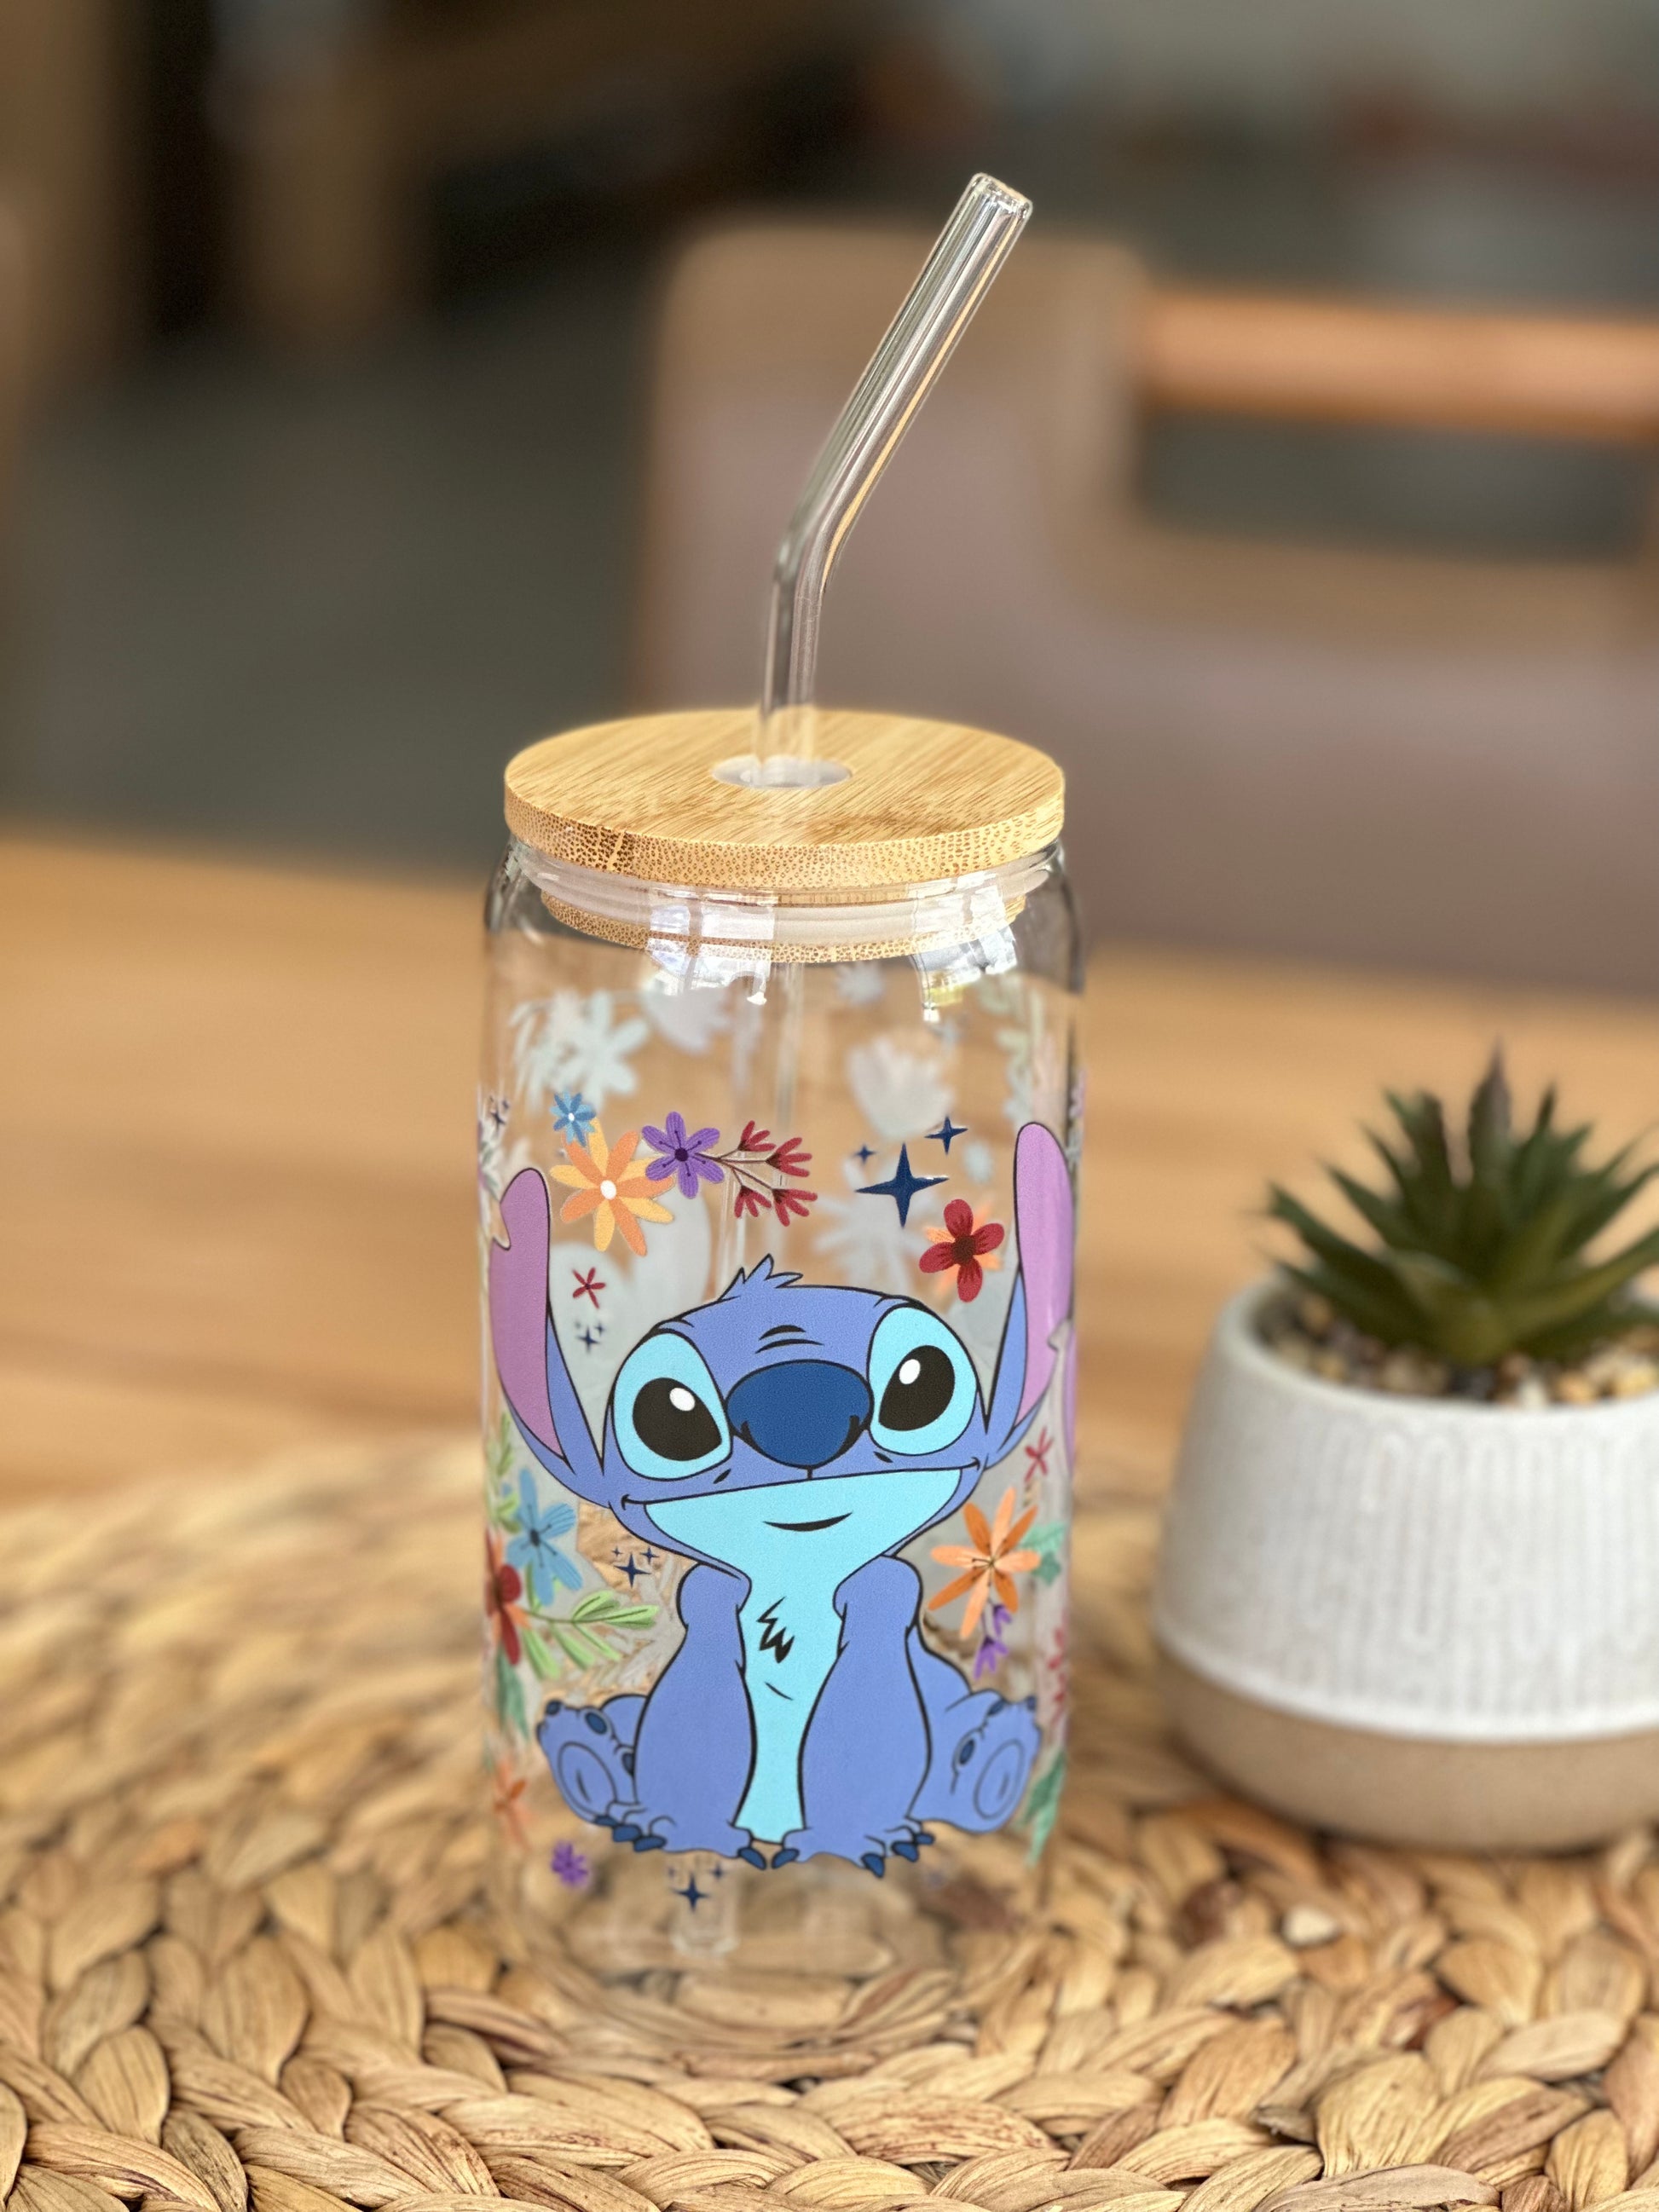 Kids Stitch Cup, Comes With Lid and Straw 